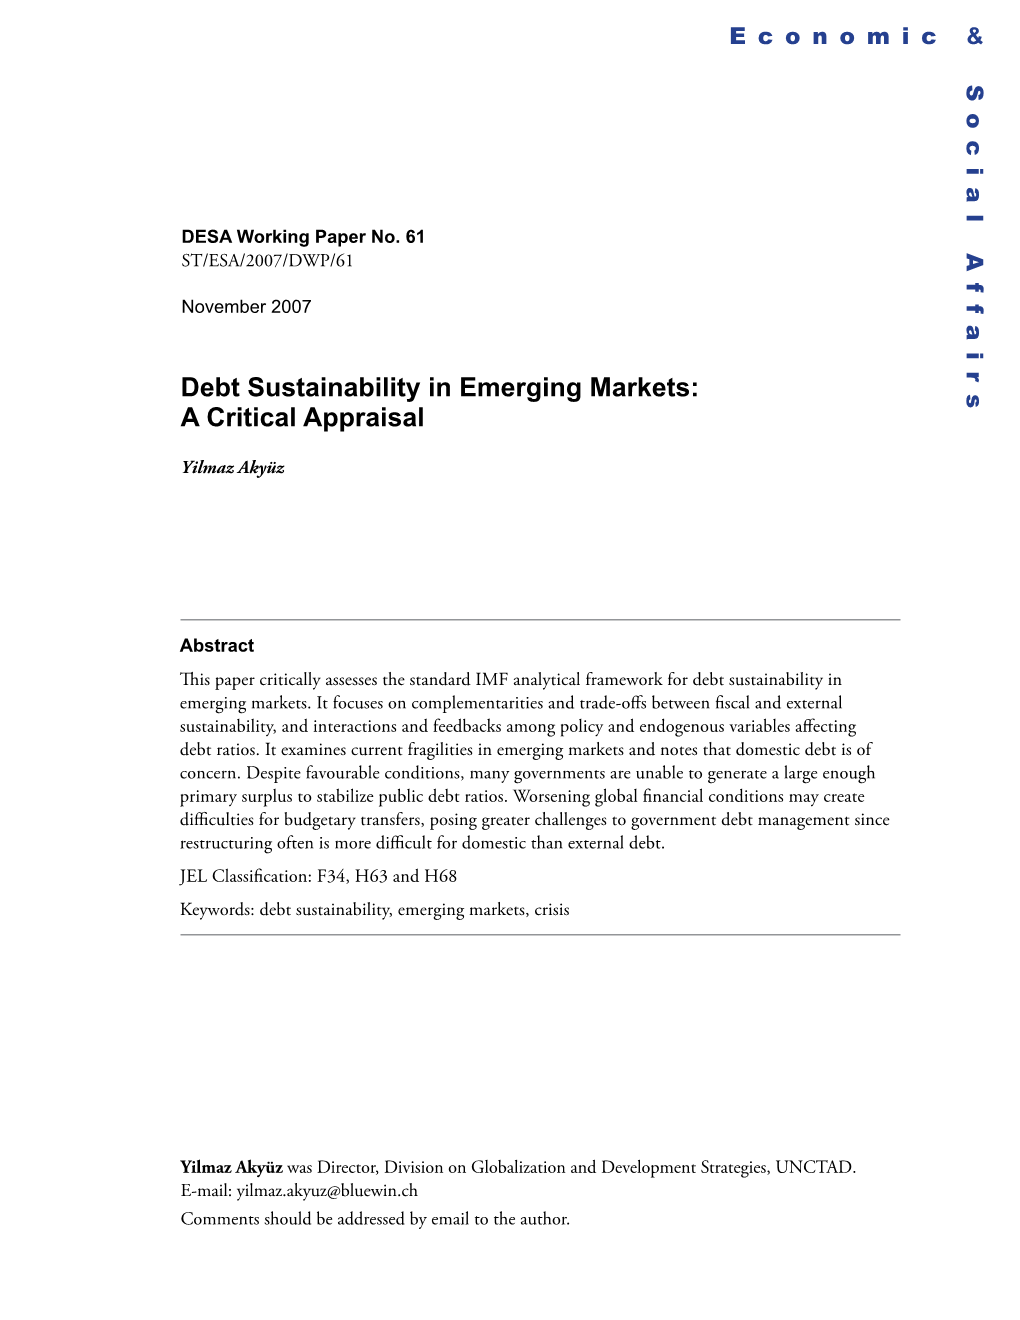 Debt Sustainability in Emerging Markets: a Critical Appraisal